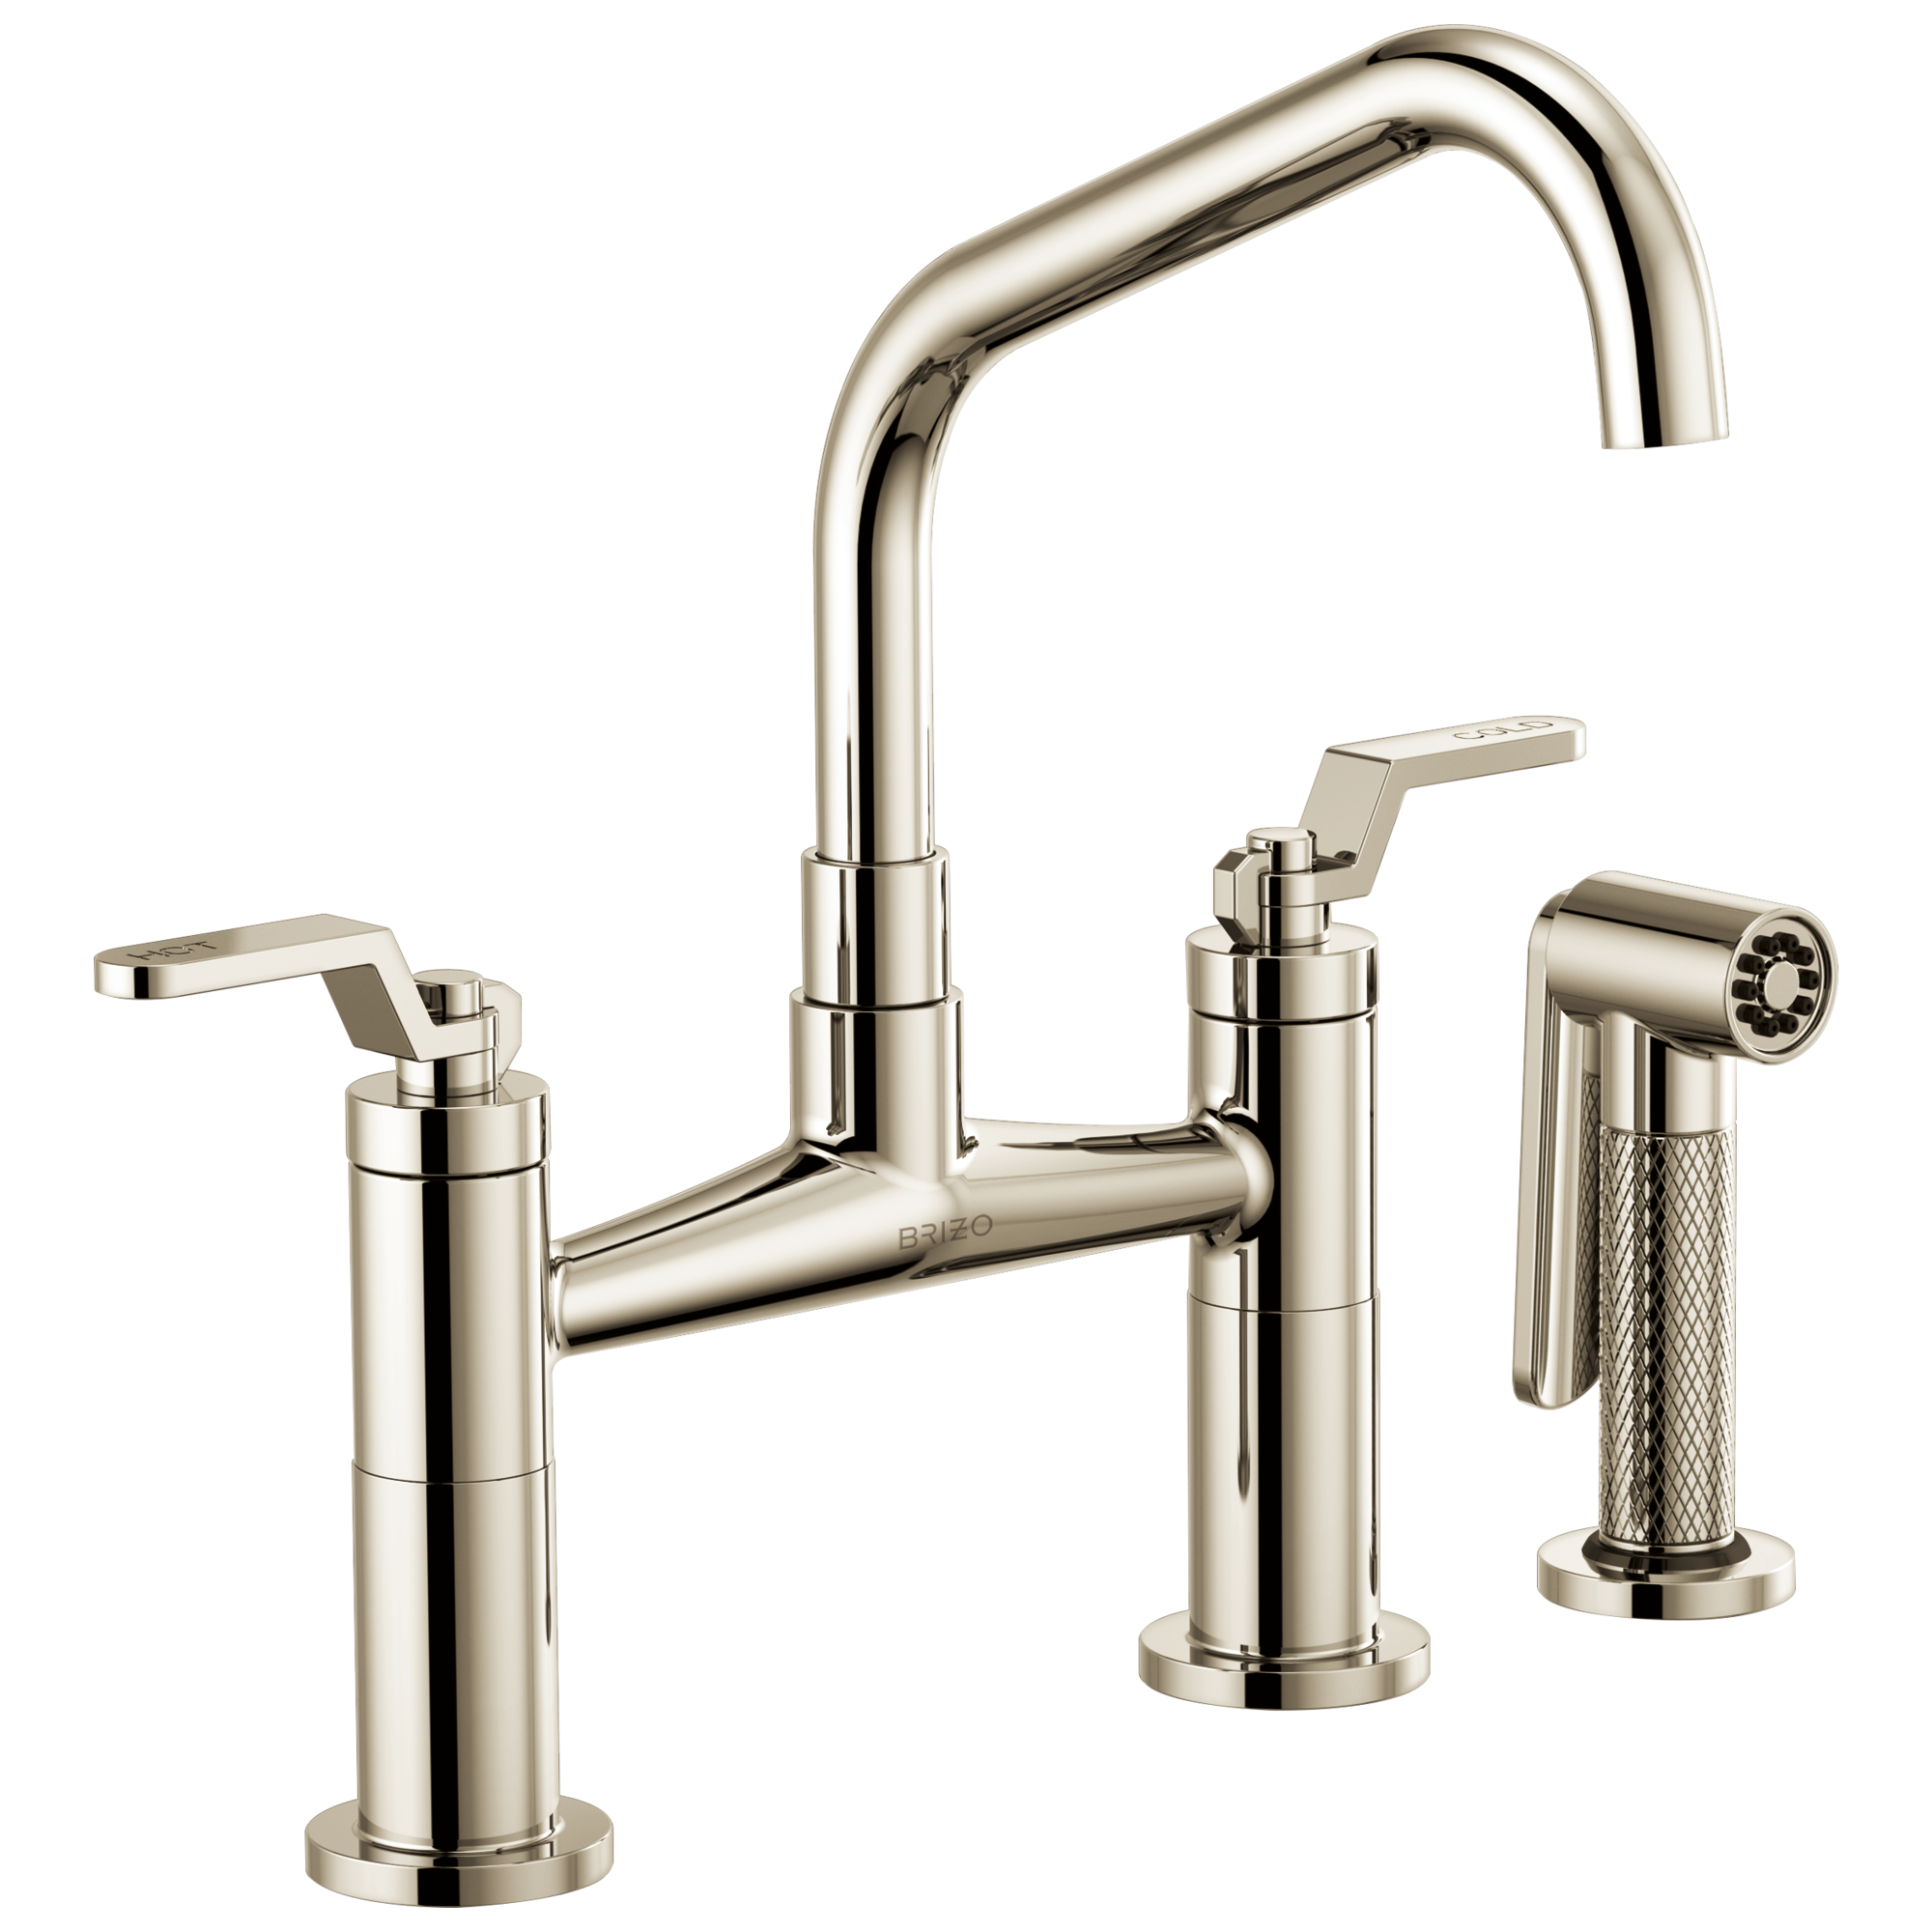 Brizo Litze: Bridge Faucet with Angled Spout and Industrial Handle